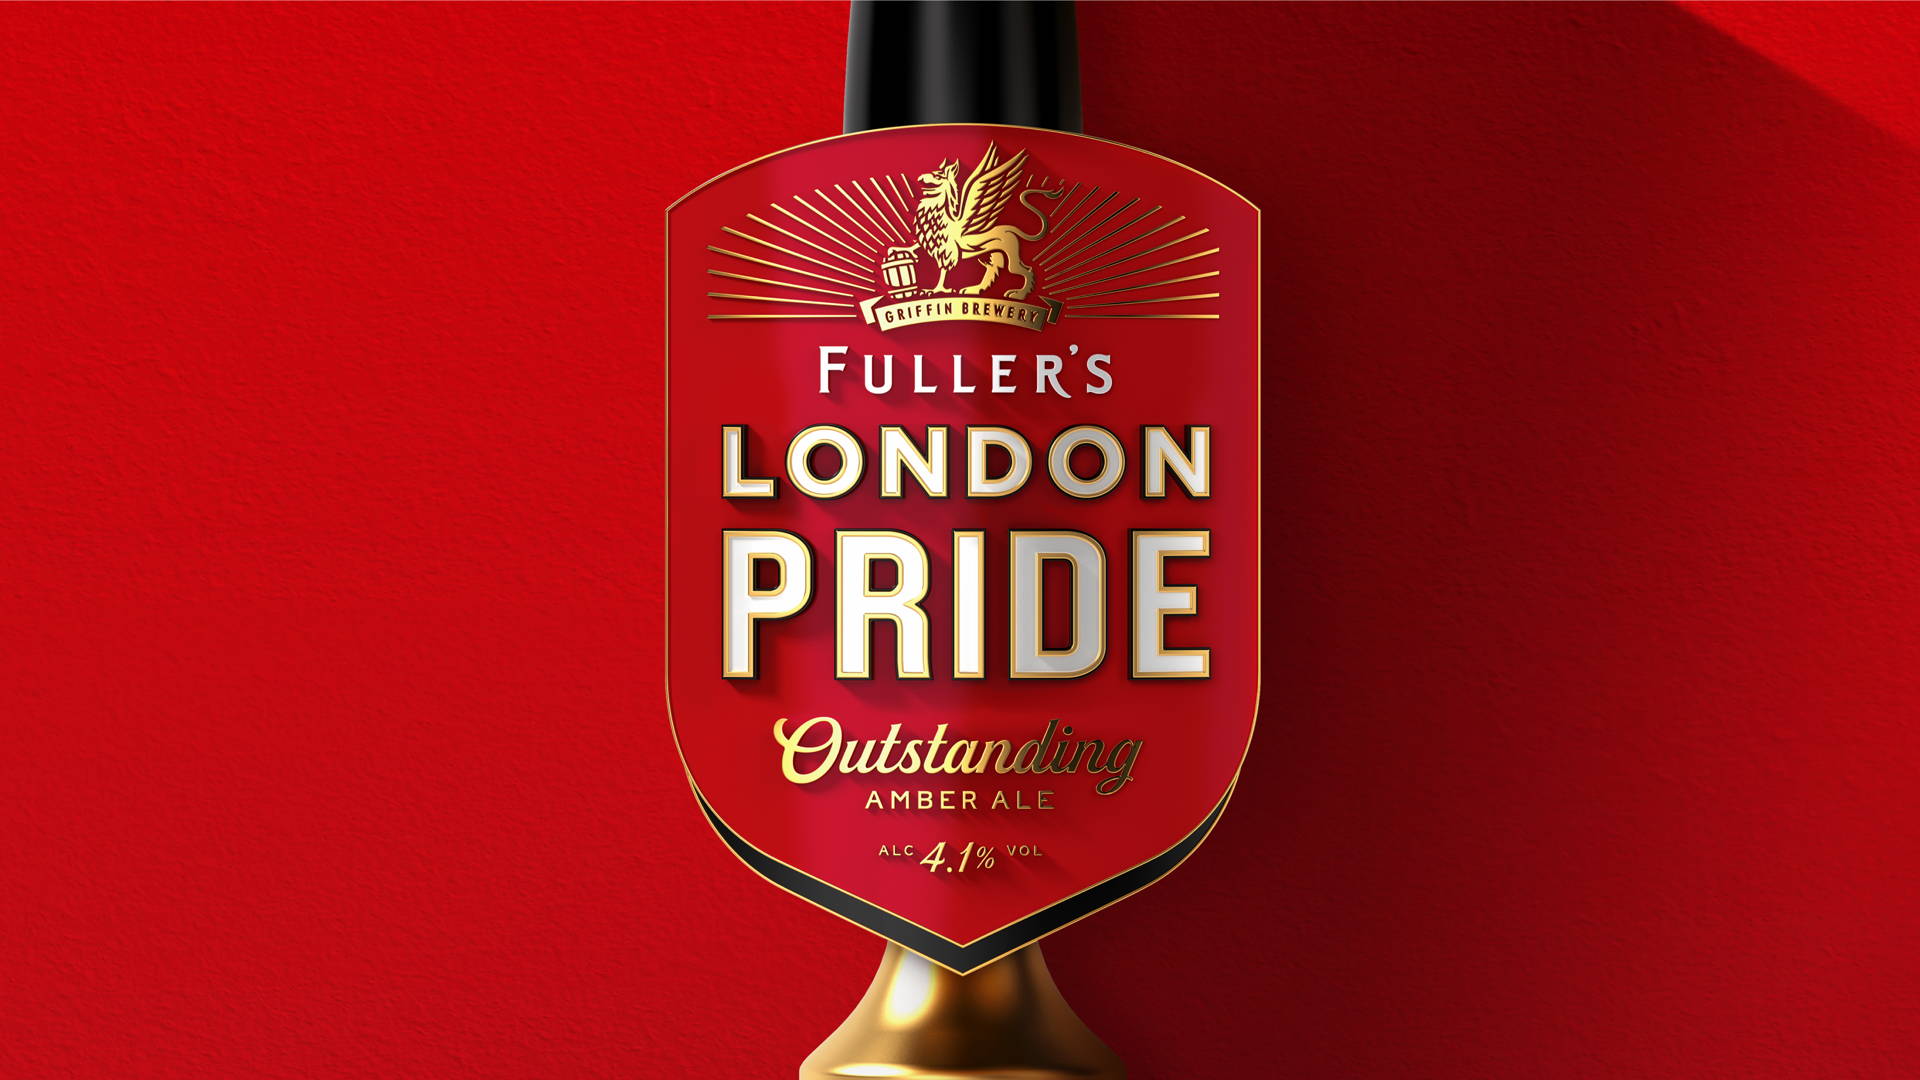 Featured image for Fuller’s London Pride Reveals Depth And Craft With New Identity By Outlaw